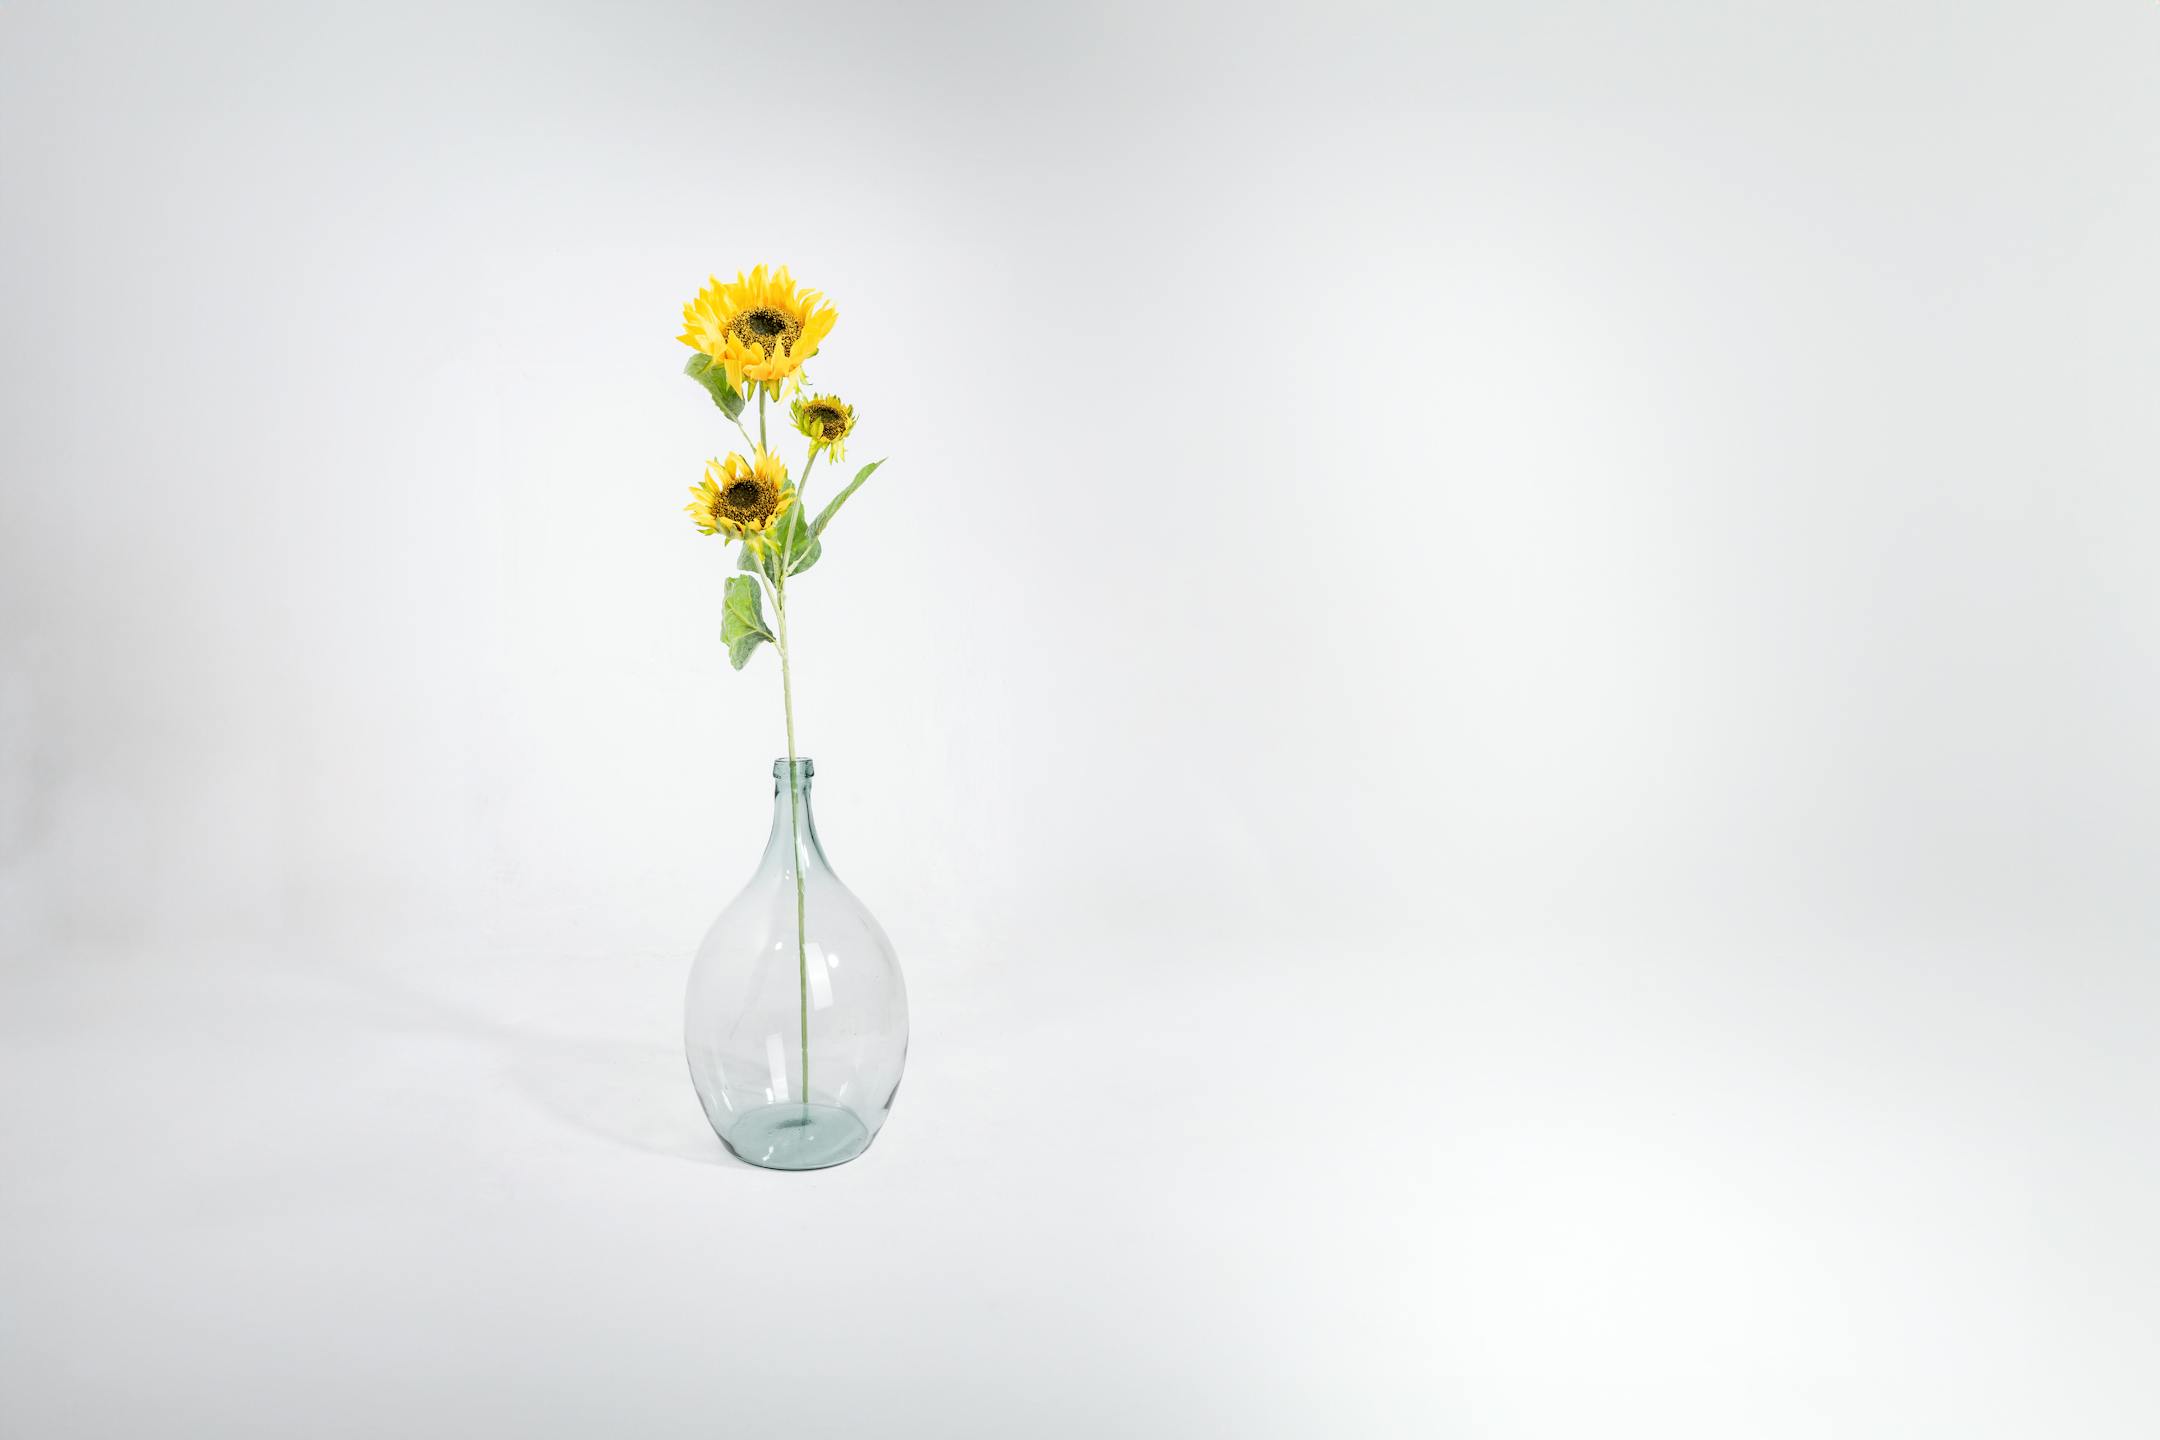 Triple yellow artificial sunflower stem in glass vase